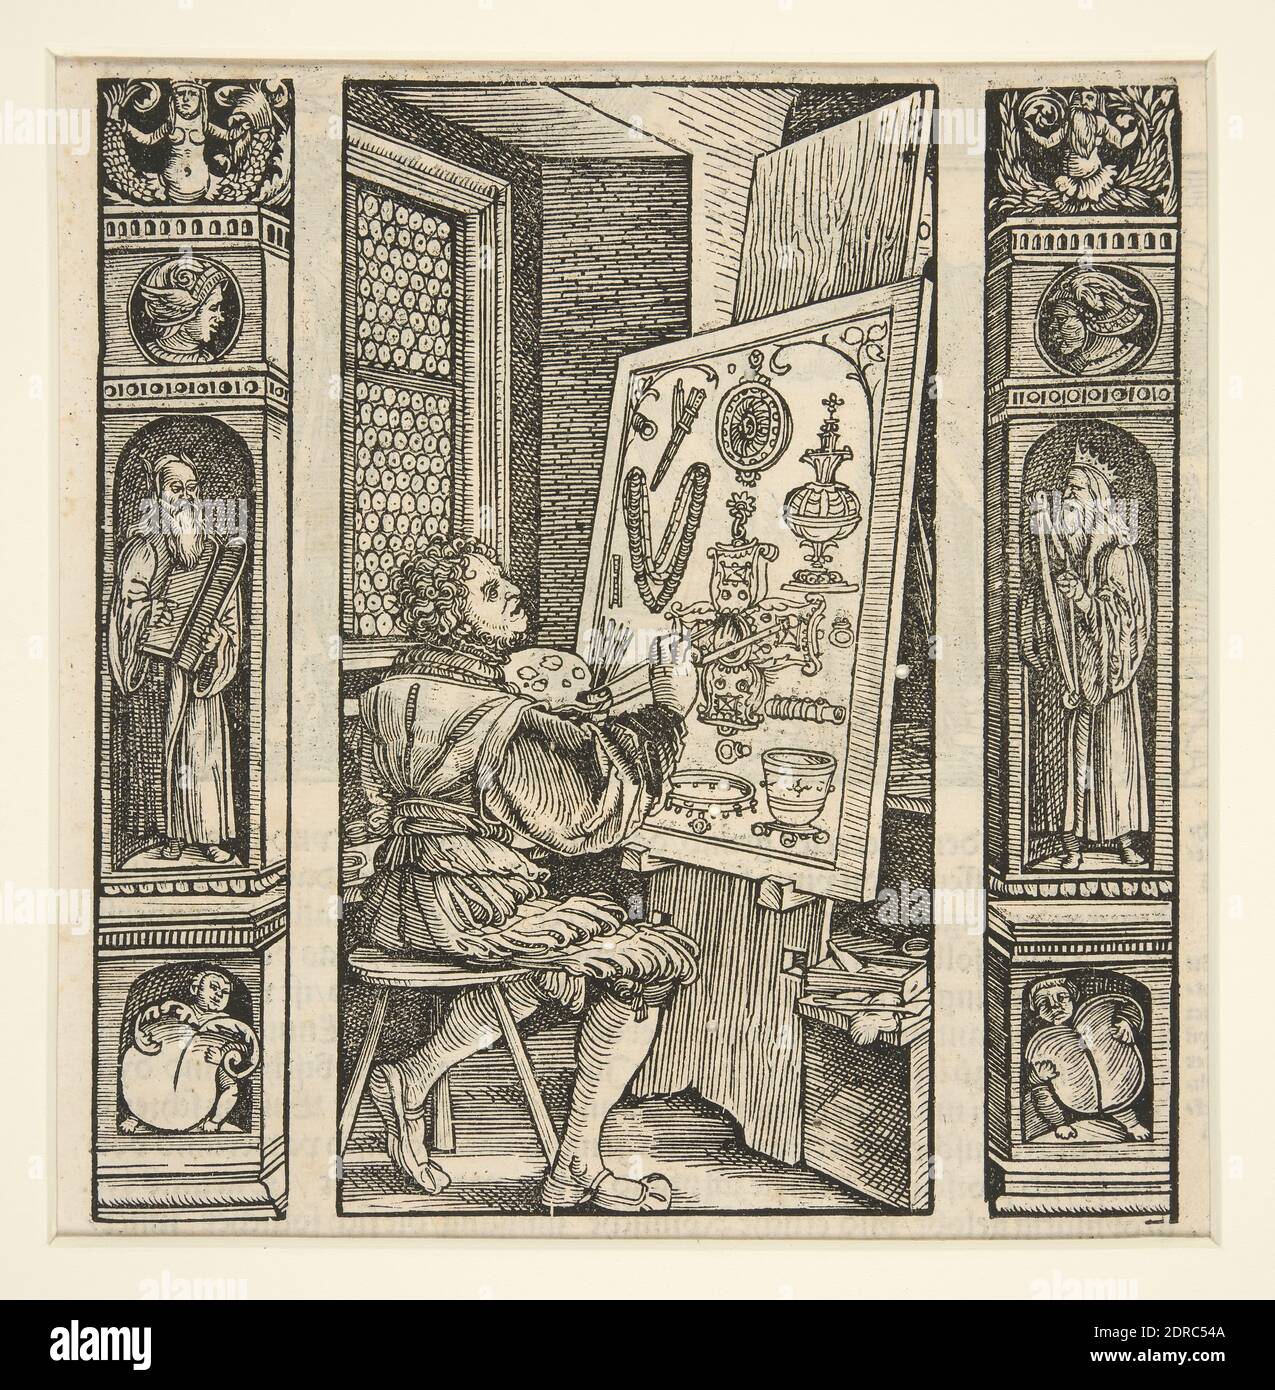 Artist: Hans Burgkmair the Elder, German, 1473–1531, Der Geschmeidemaler from Petrarch’s Glucksbuch?, ca. 1530, Woodcut, image: 27.9 × 17.7 cm (11 × 6 15/16 in.), Made in Germany, German, 16th century, Works on Paper - Prints Stock Photo